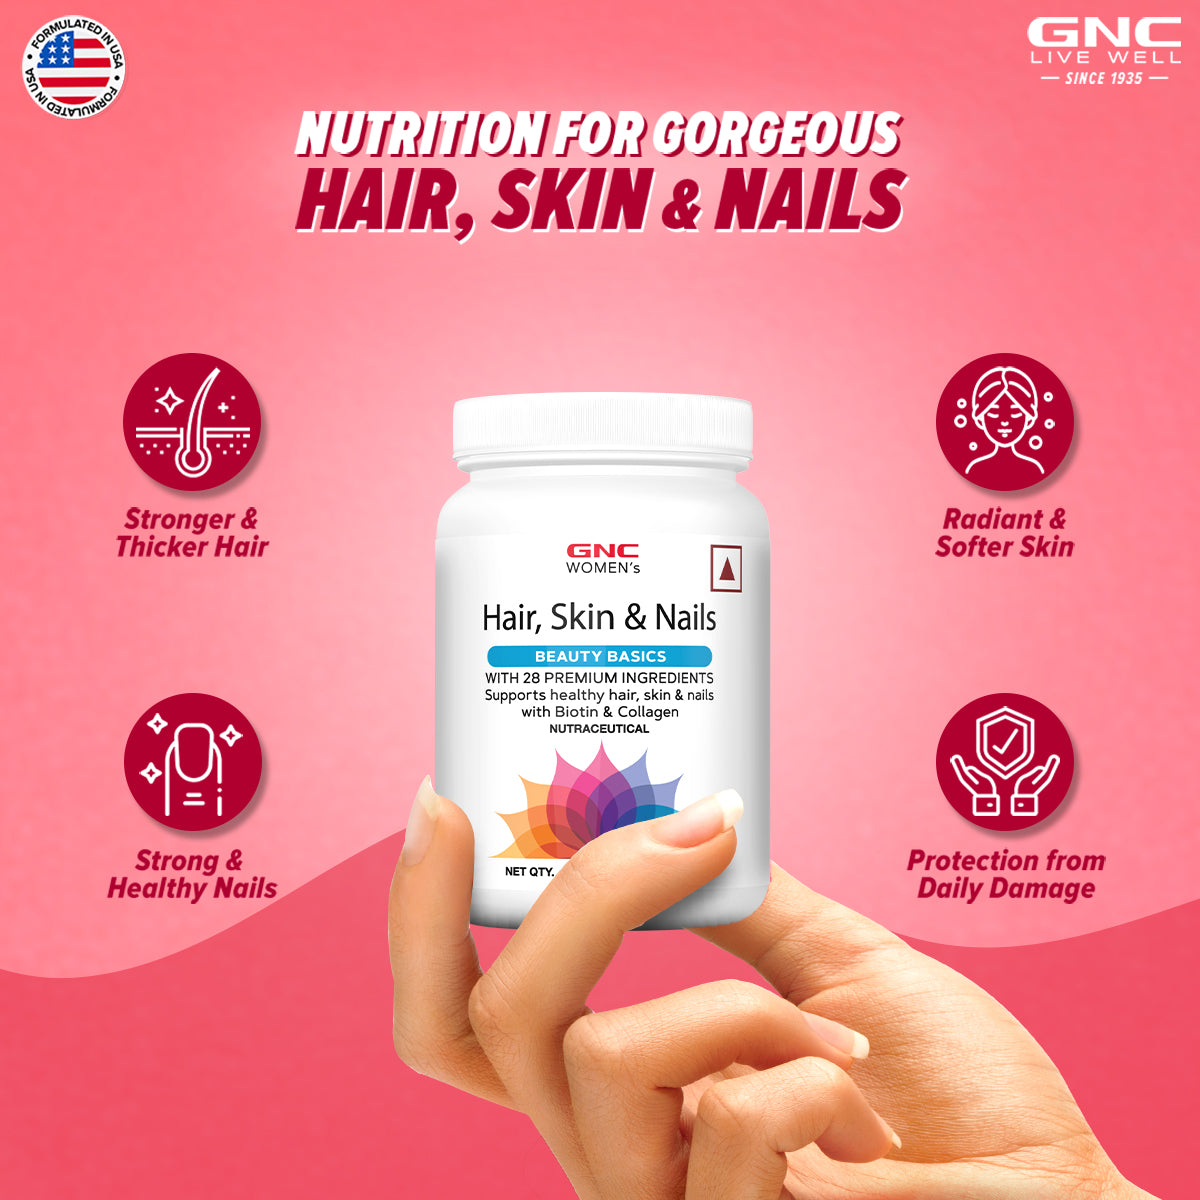 GNC Women's Hair, Skin & Nails - For Stronger Hair, Clearer Skin, and Healthier Nails